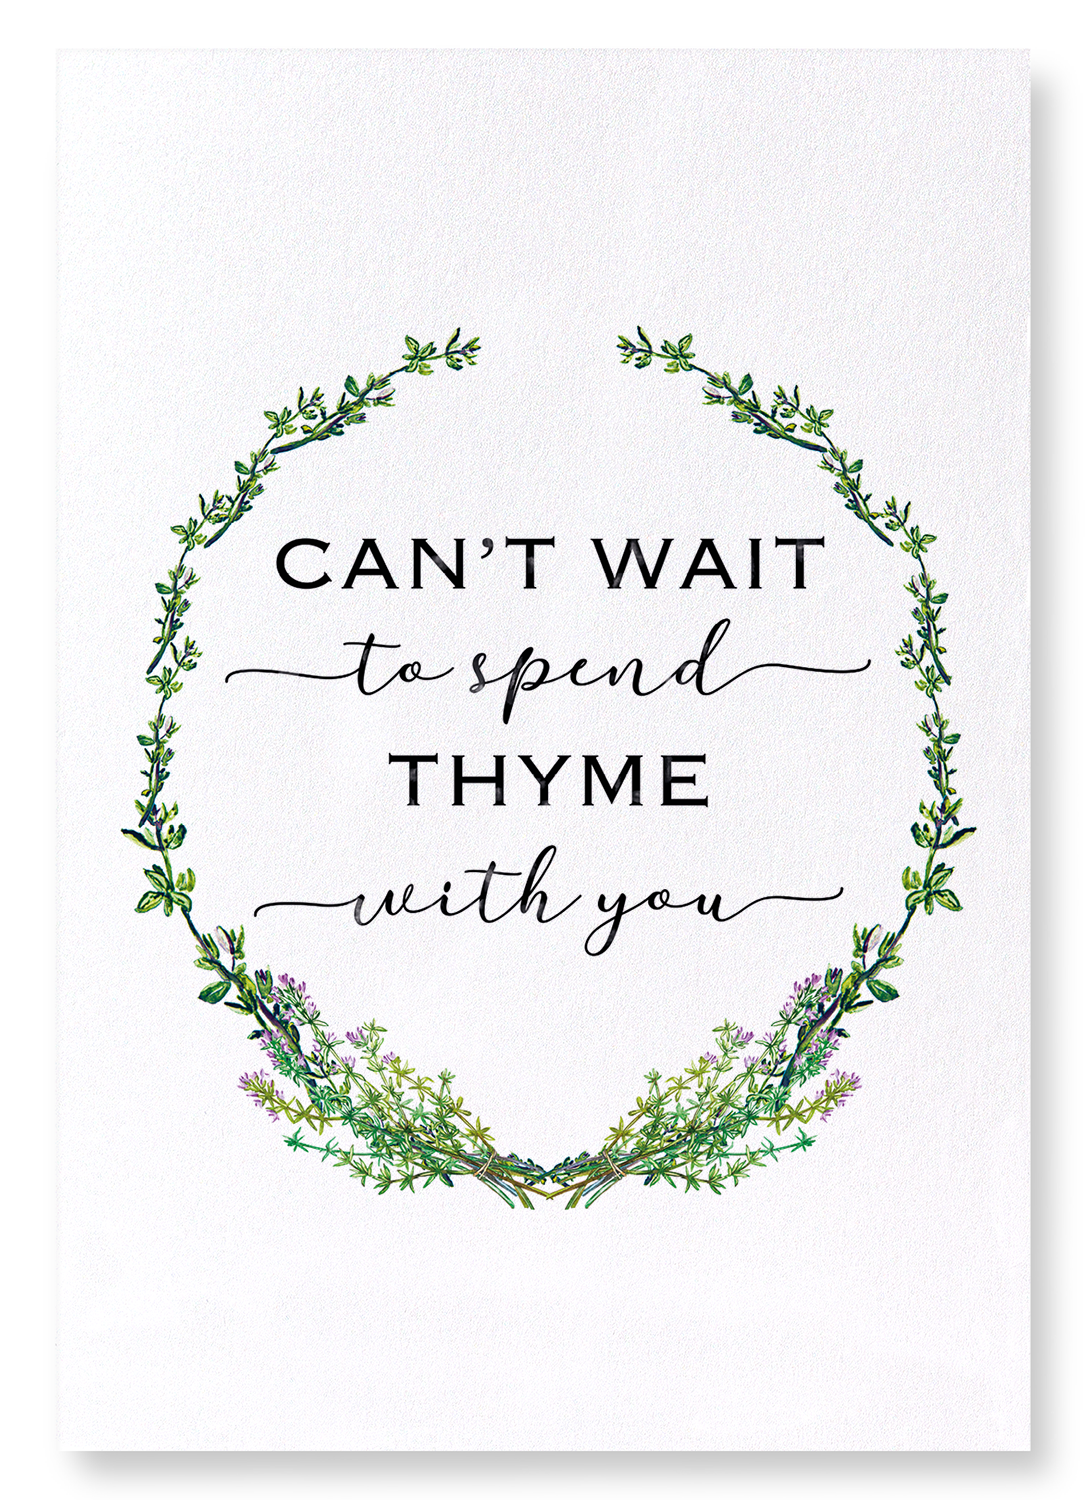 SPEND THYME WITH YOU